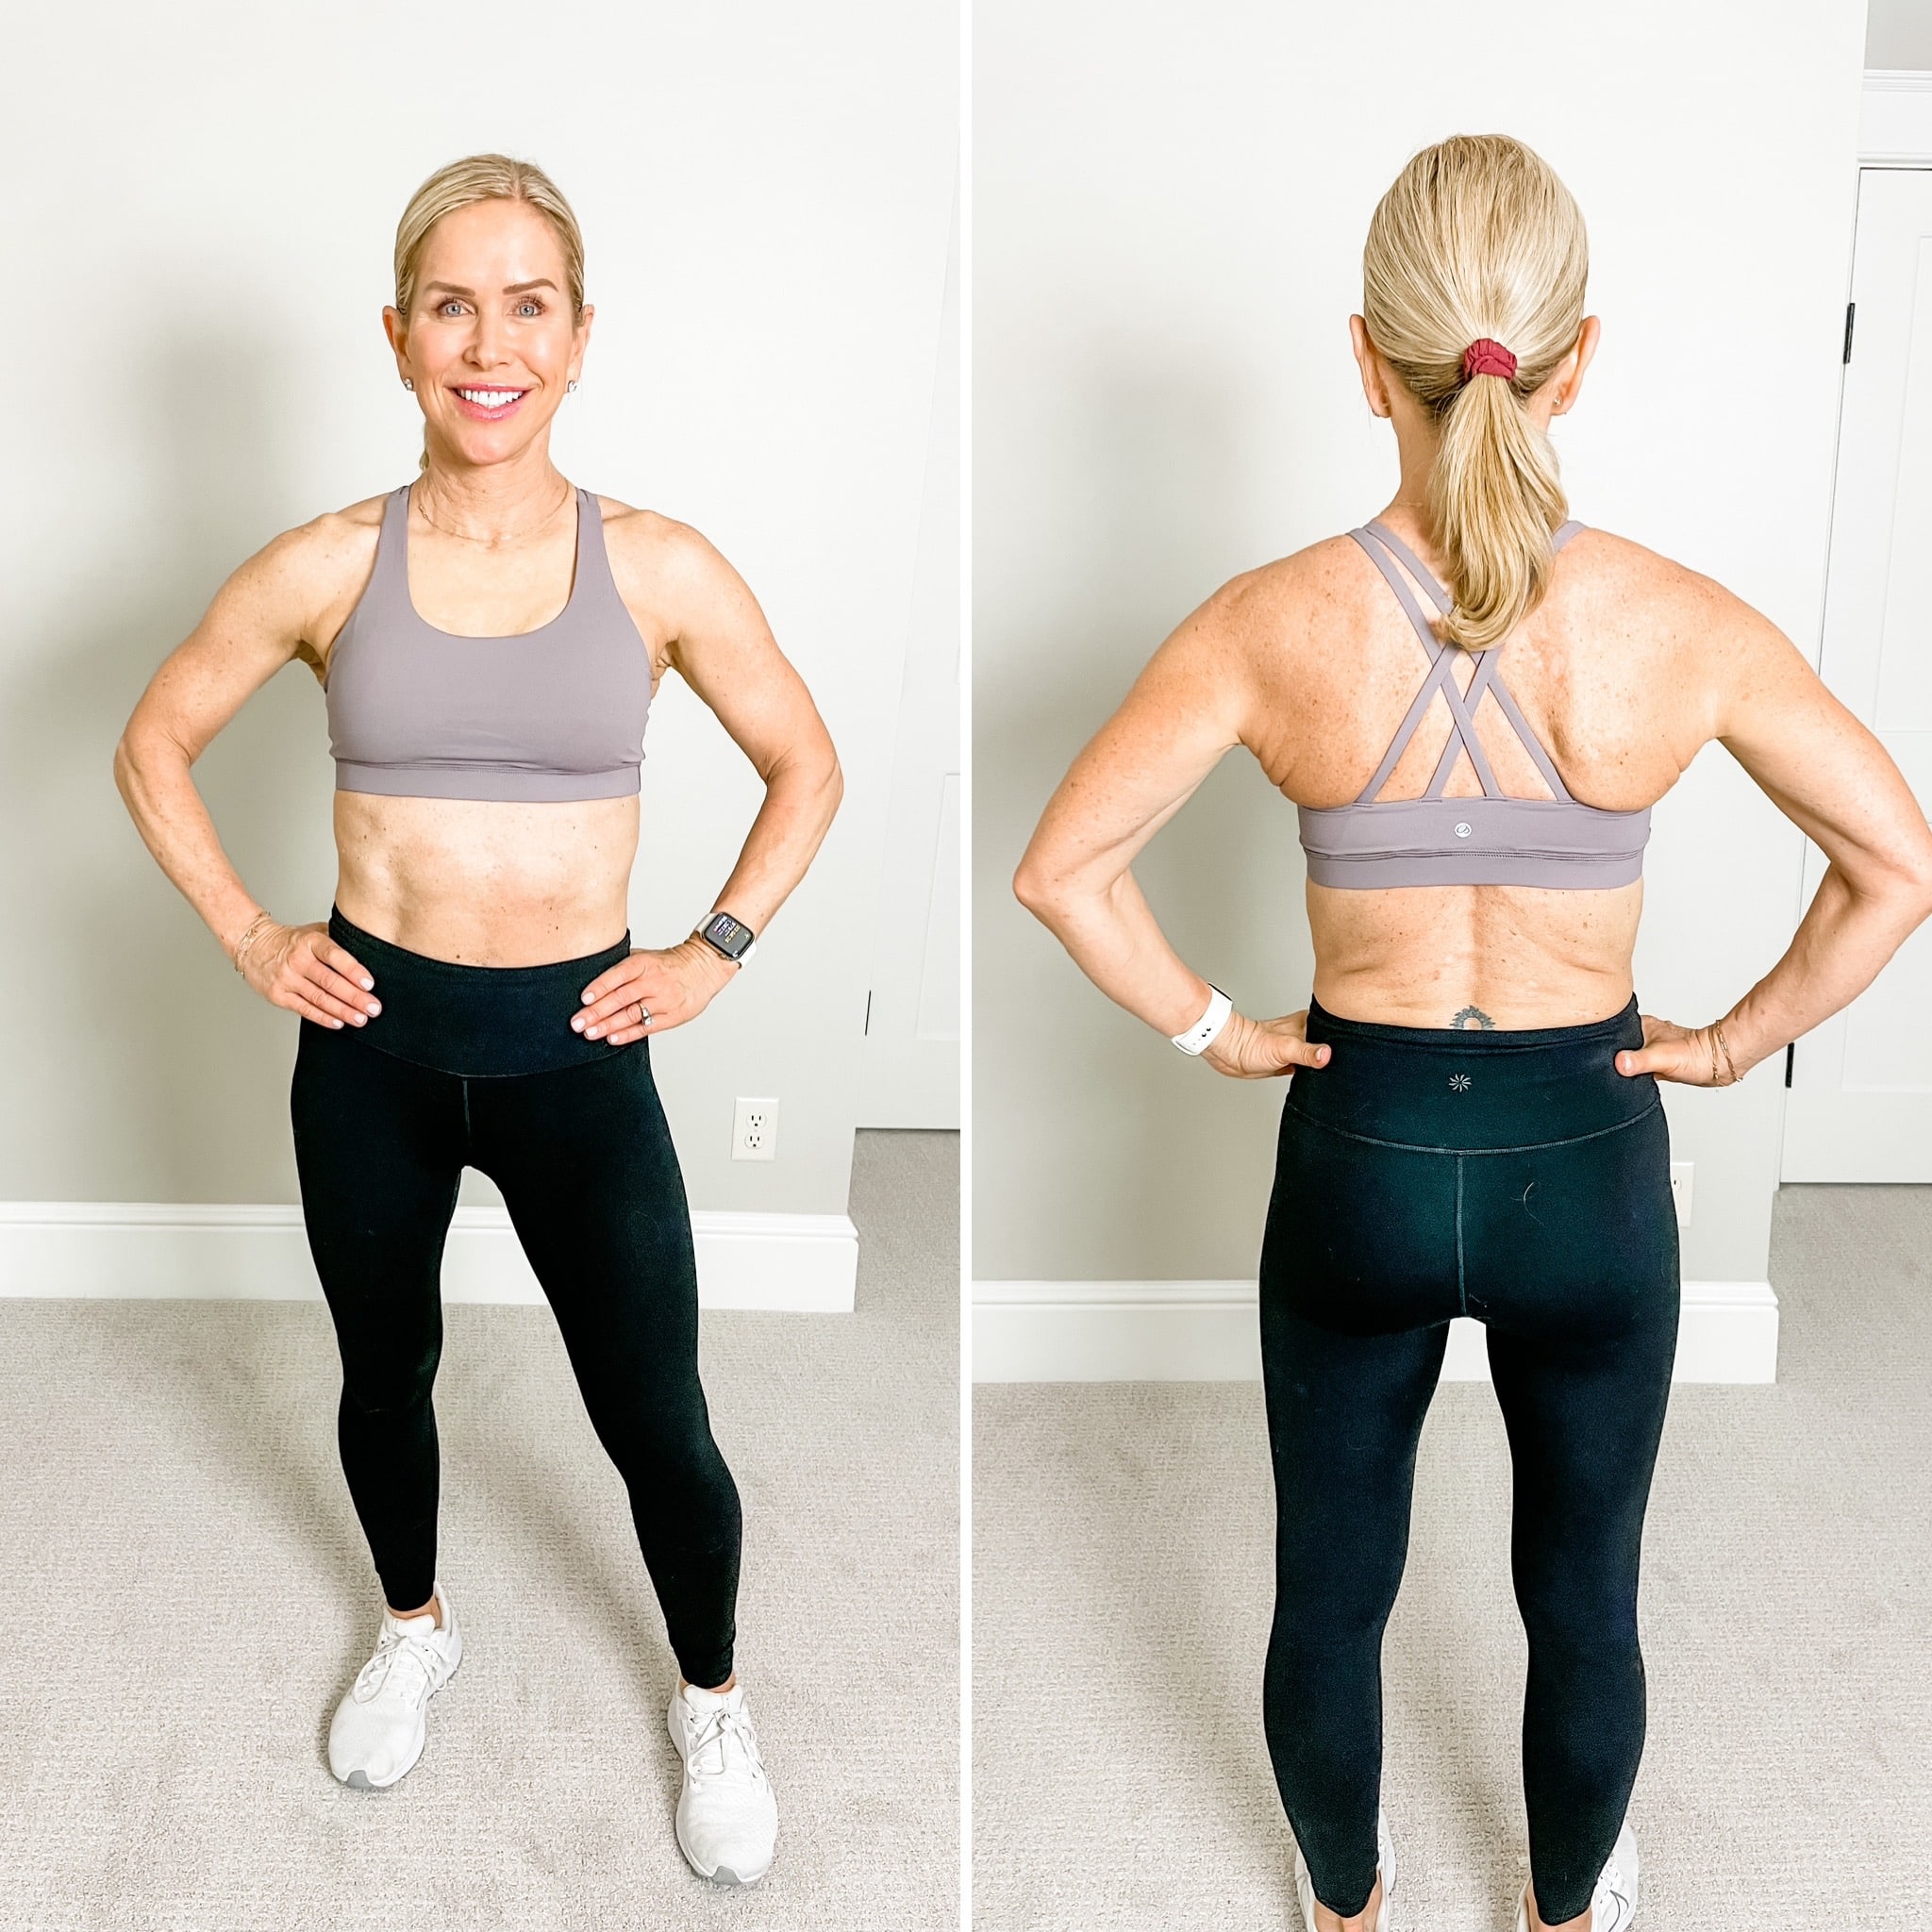 Chris Freytag wearing a grey strappy sports bra and black leggings in front of a white wall.